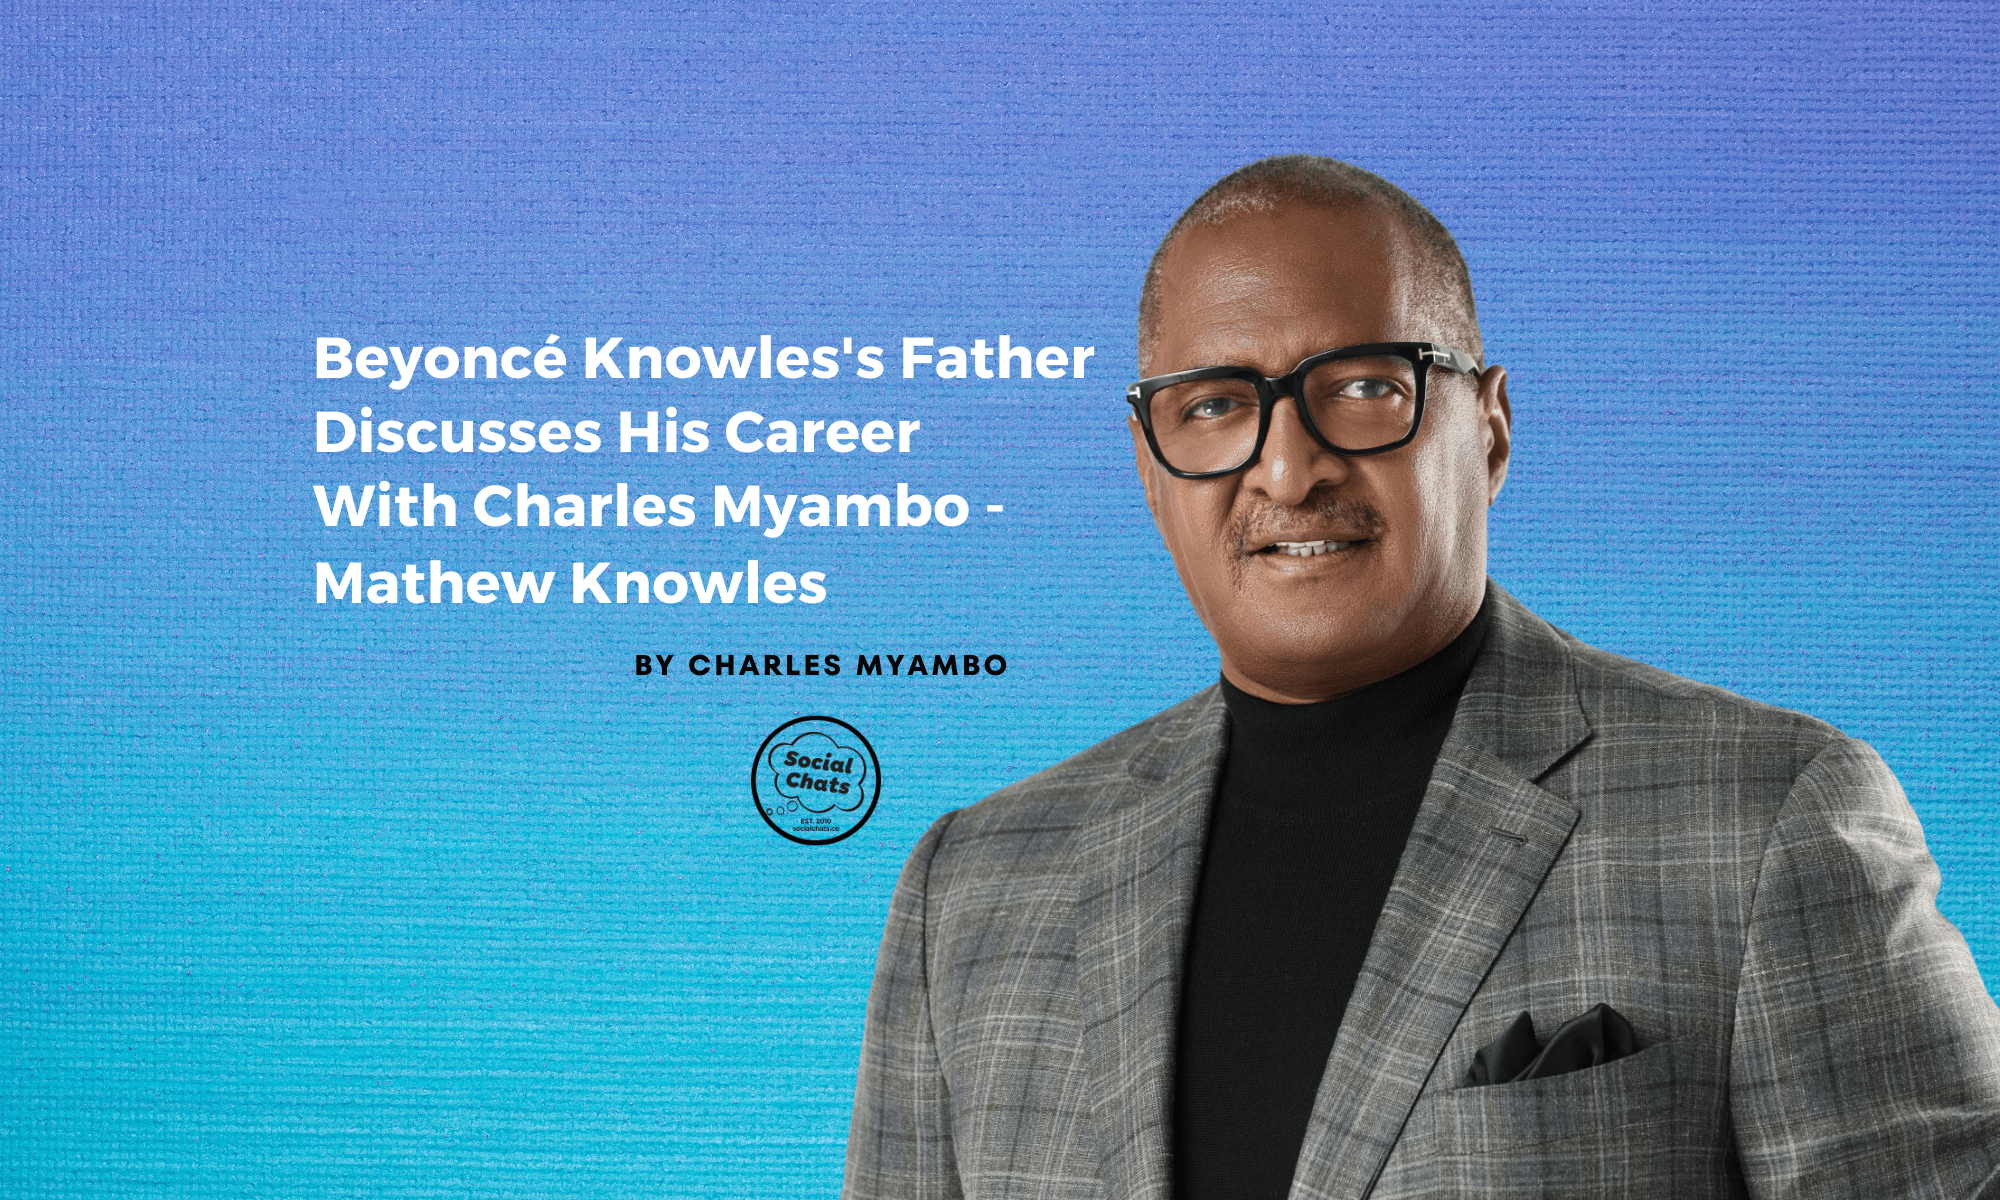 Beyoncé Knowles's Father Discusses His Career With Charles Myambo - Mathew Knowles